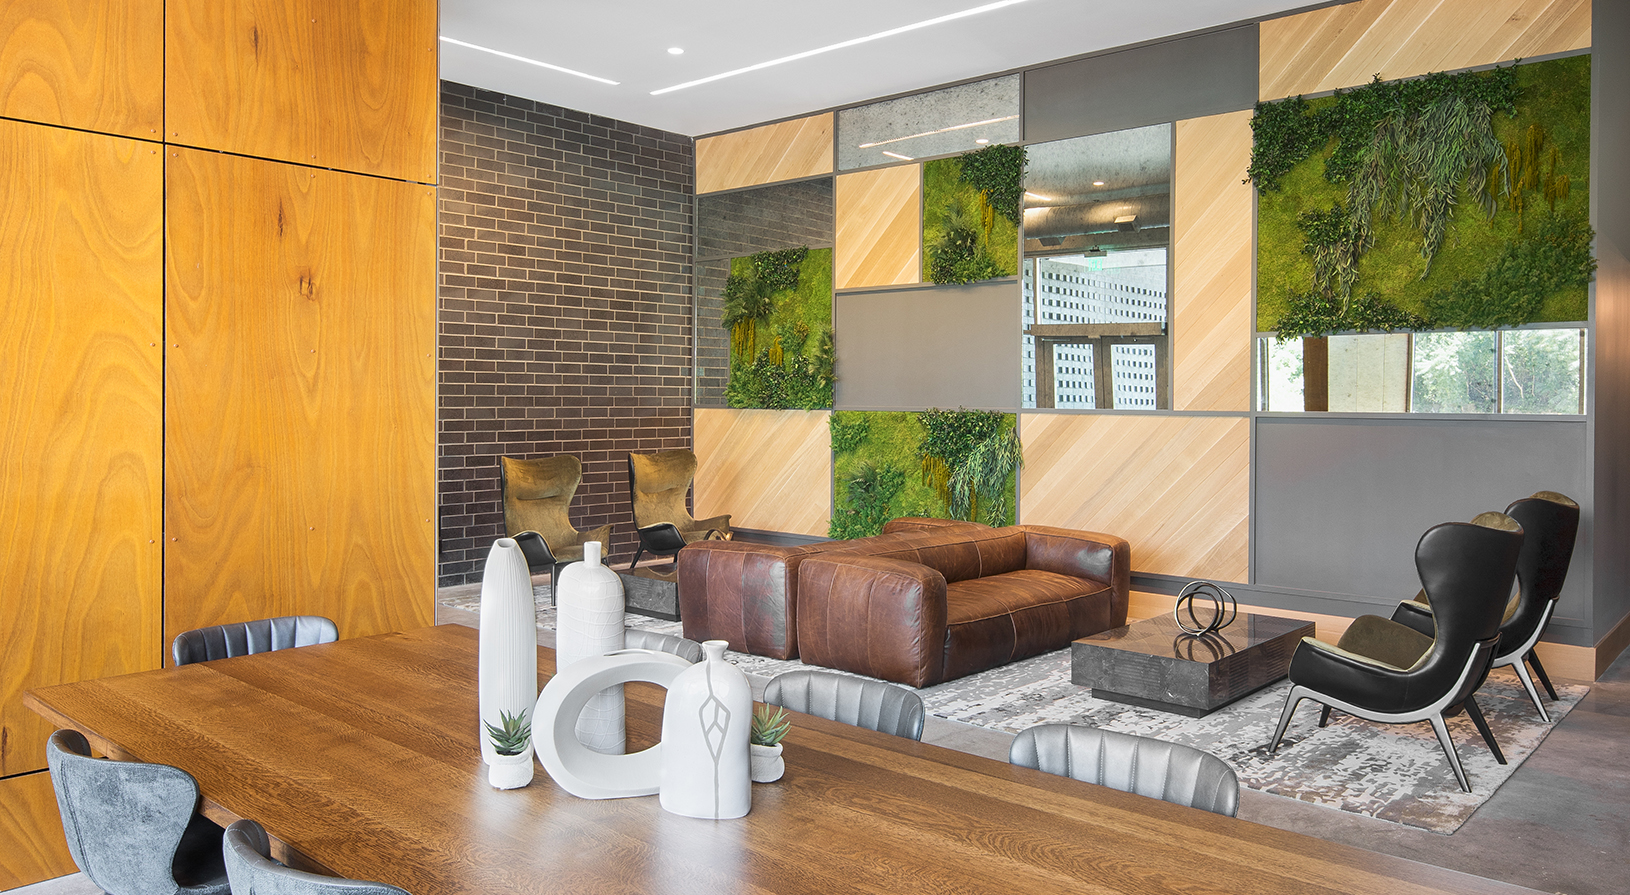 Peace Raleigh Apartments resident lobby with greenery on the walls, a large desk, and multiple seating options